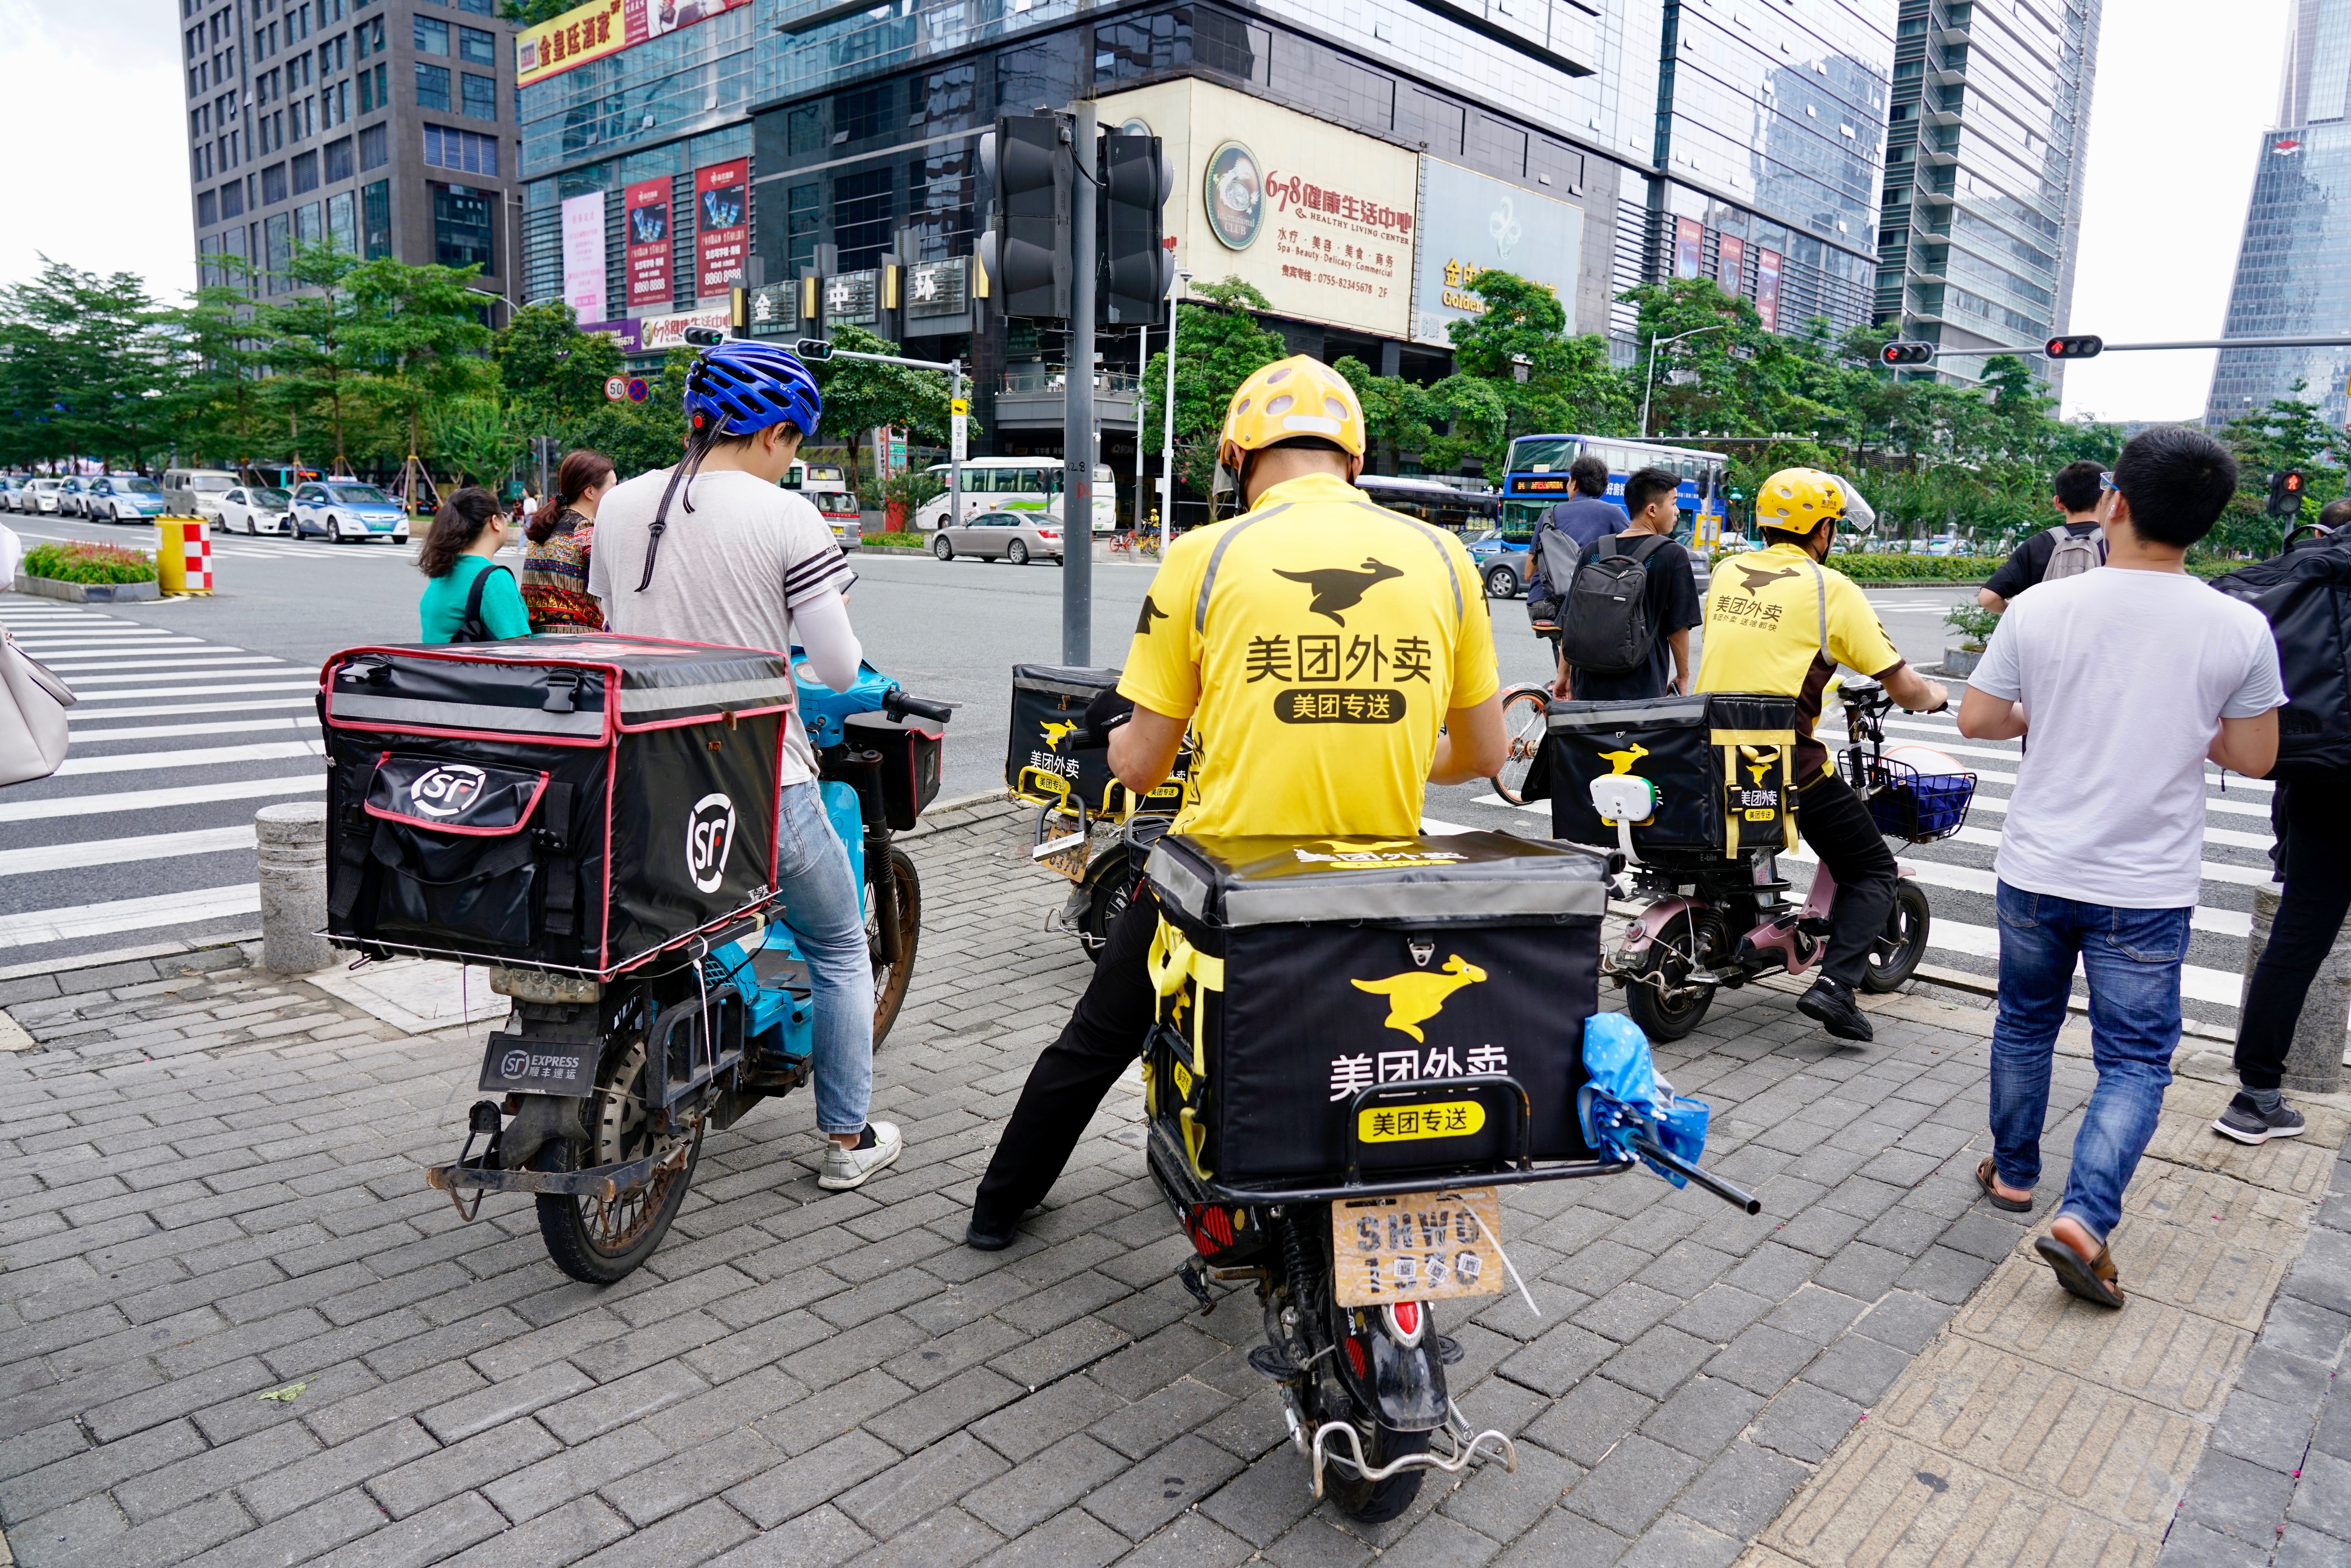 Alibaba Could Suffer Fallout As Top Rival Plans Foray In Food Delivery Service